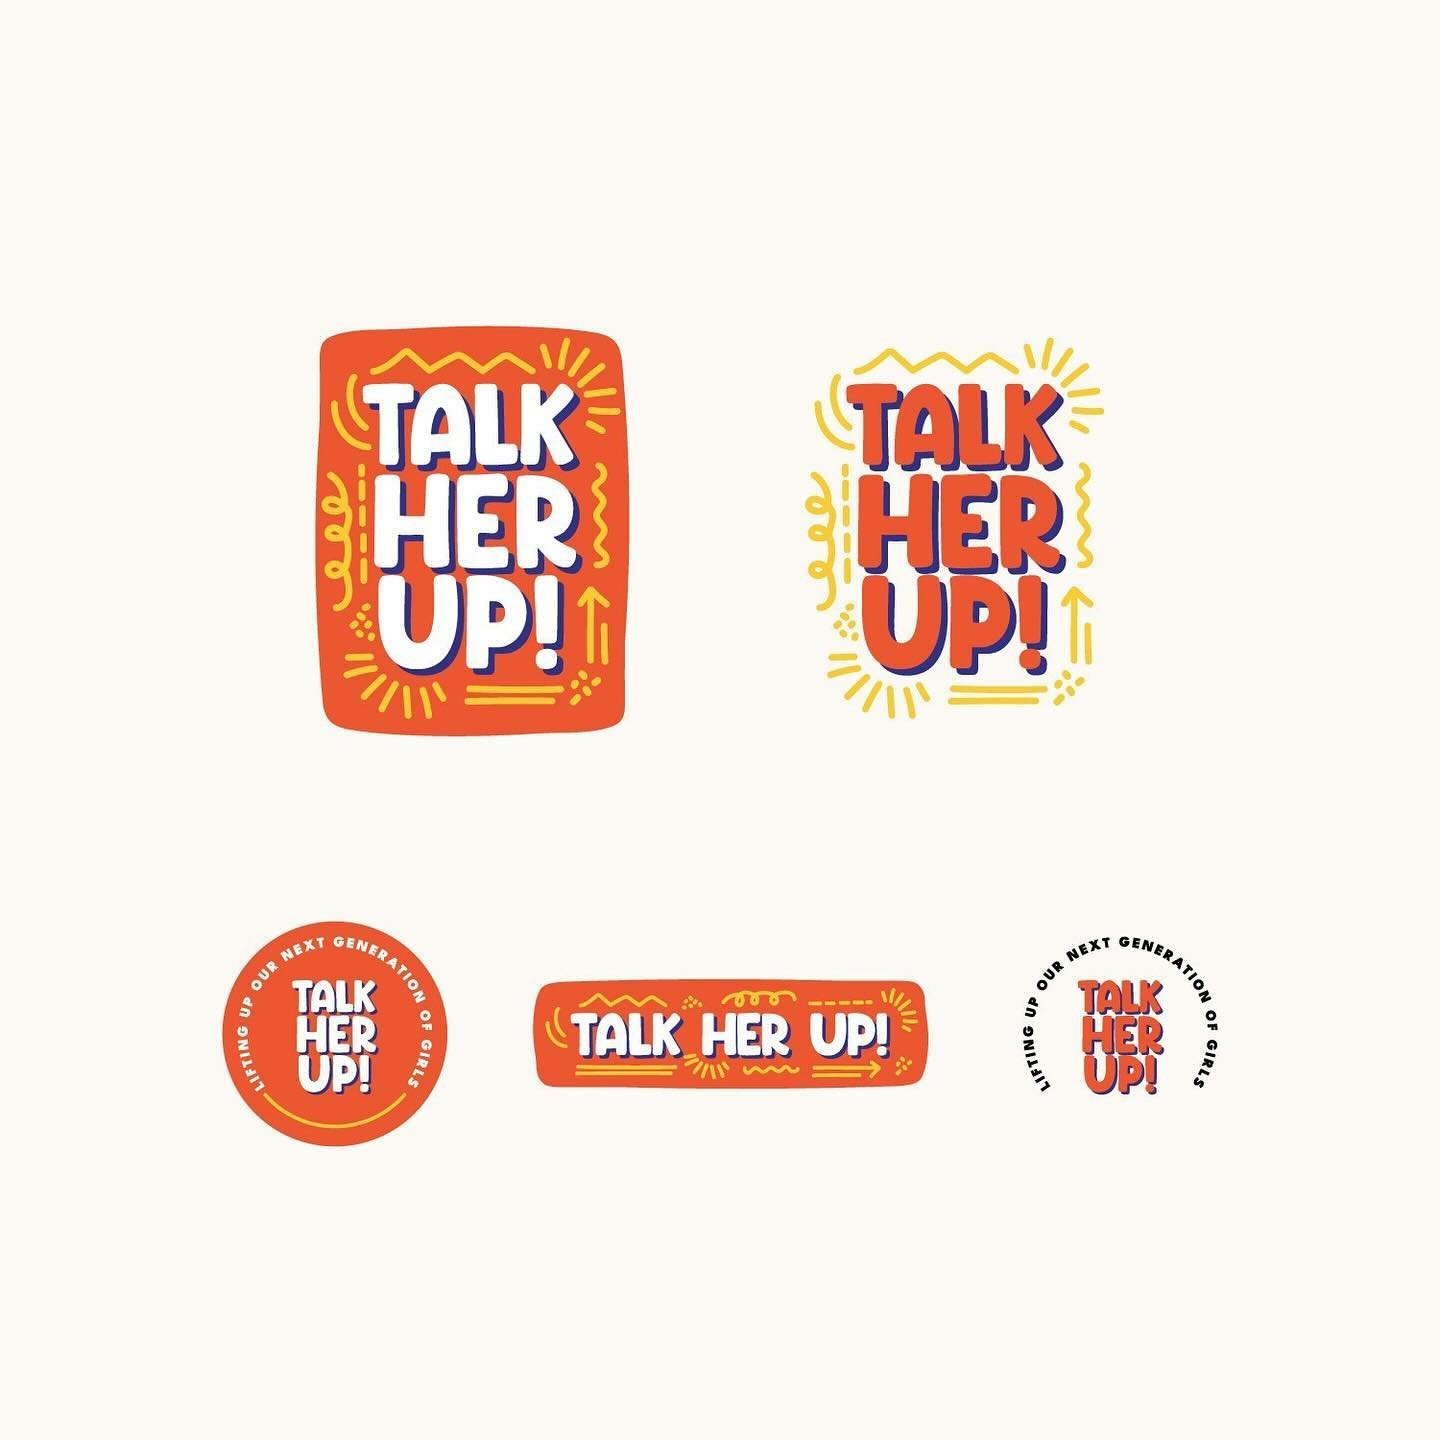 Here&rsquo;s a look at 3 unused concepts that eventually turned into the Talk Her Up brand we developed and launched about 6 months ago. Which is your favorite?